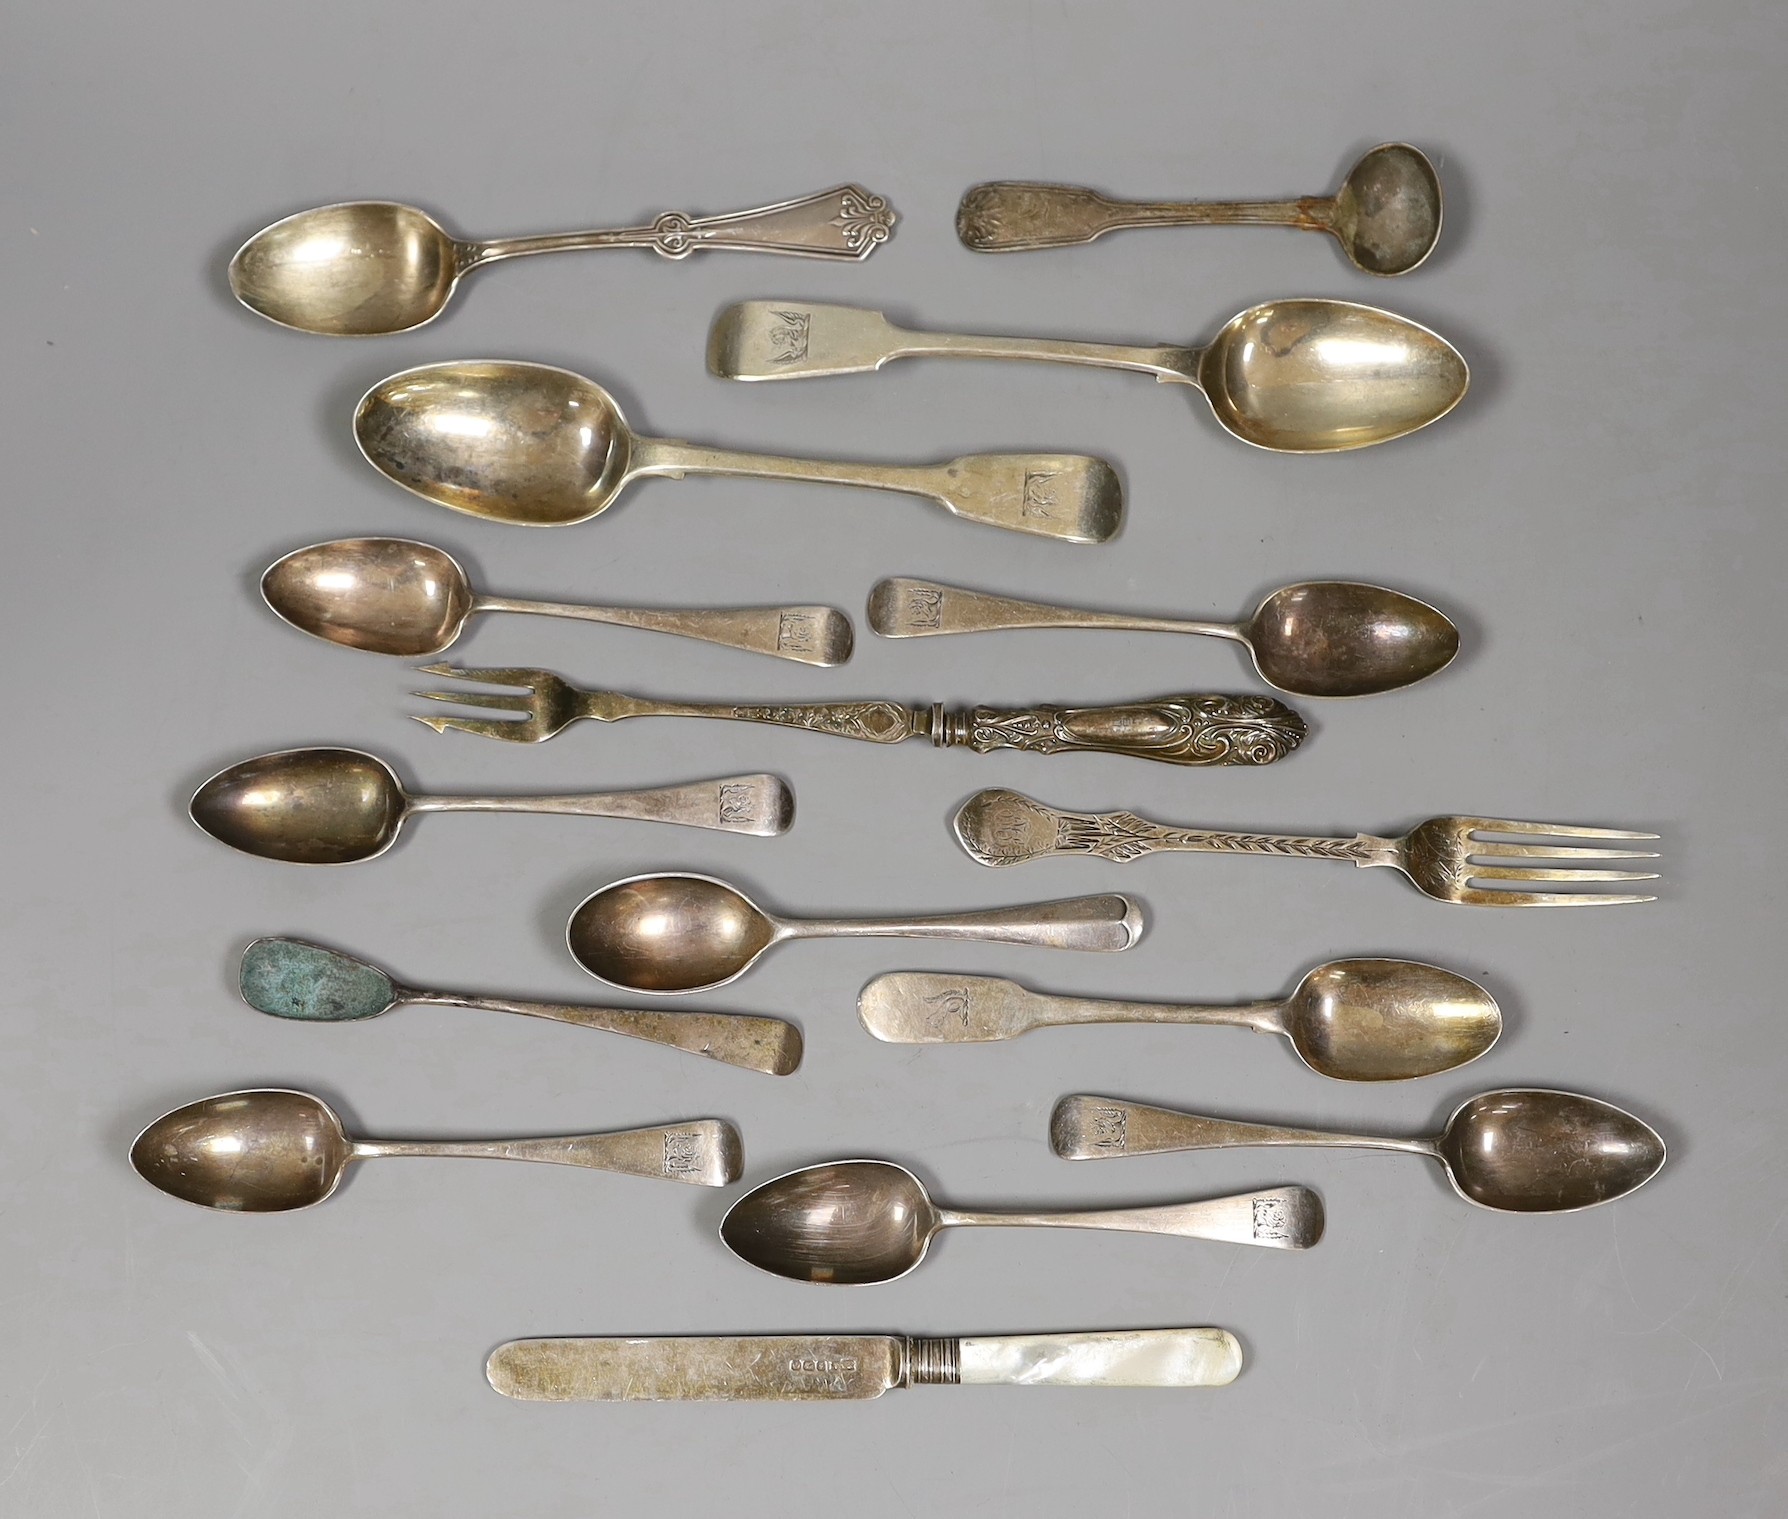 A set of six Victorian provincial silver Old English pattern teaspoons by Josiah Williams & Co, Exeter, 1877 and a small quantity of mainly 19th century silver flatware and a plated teaspoon and pickle fork, weighable si